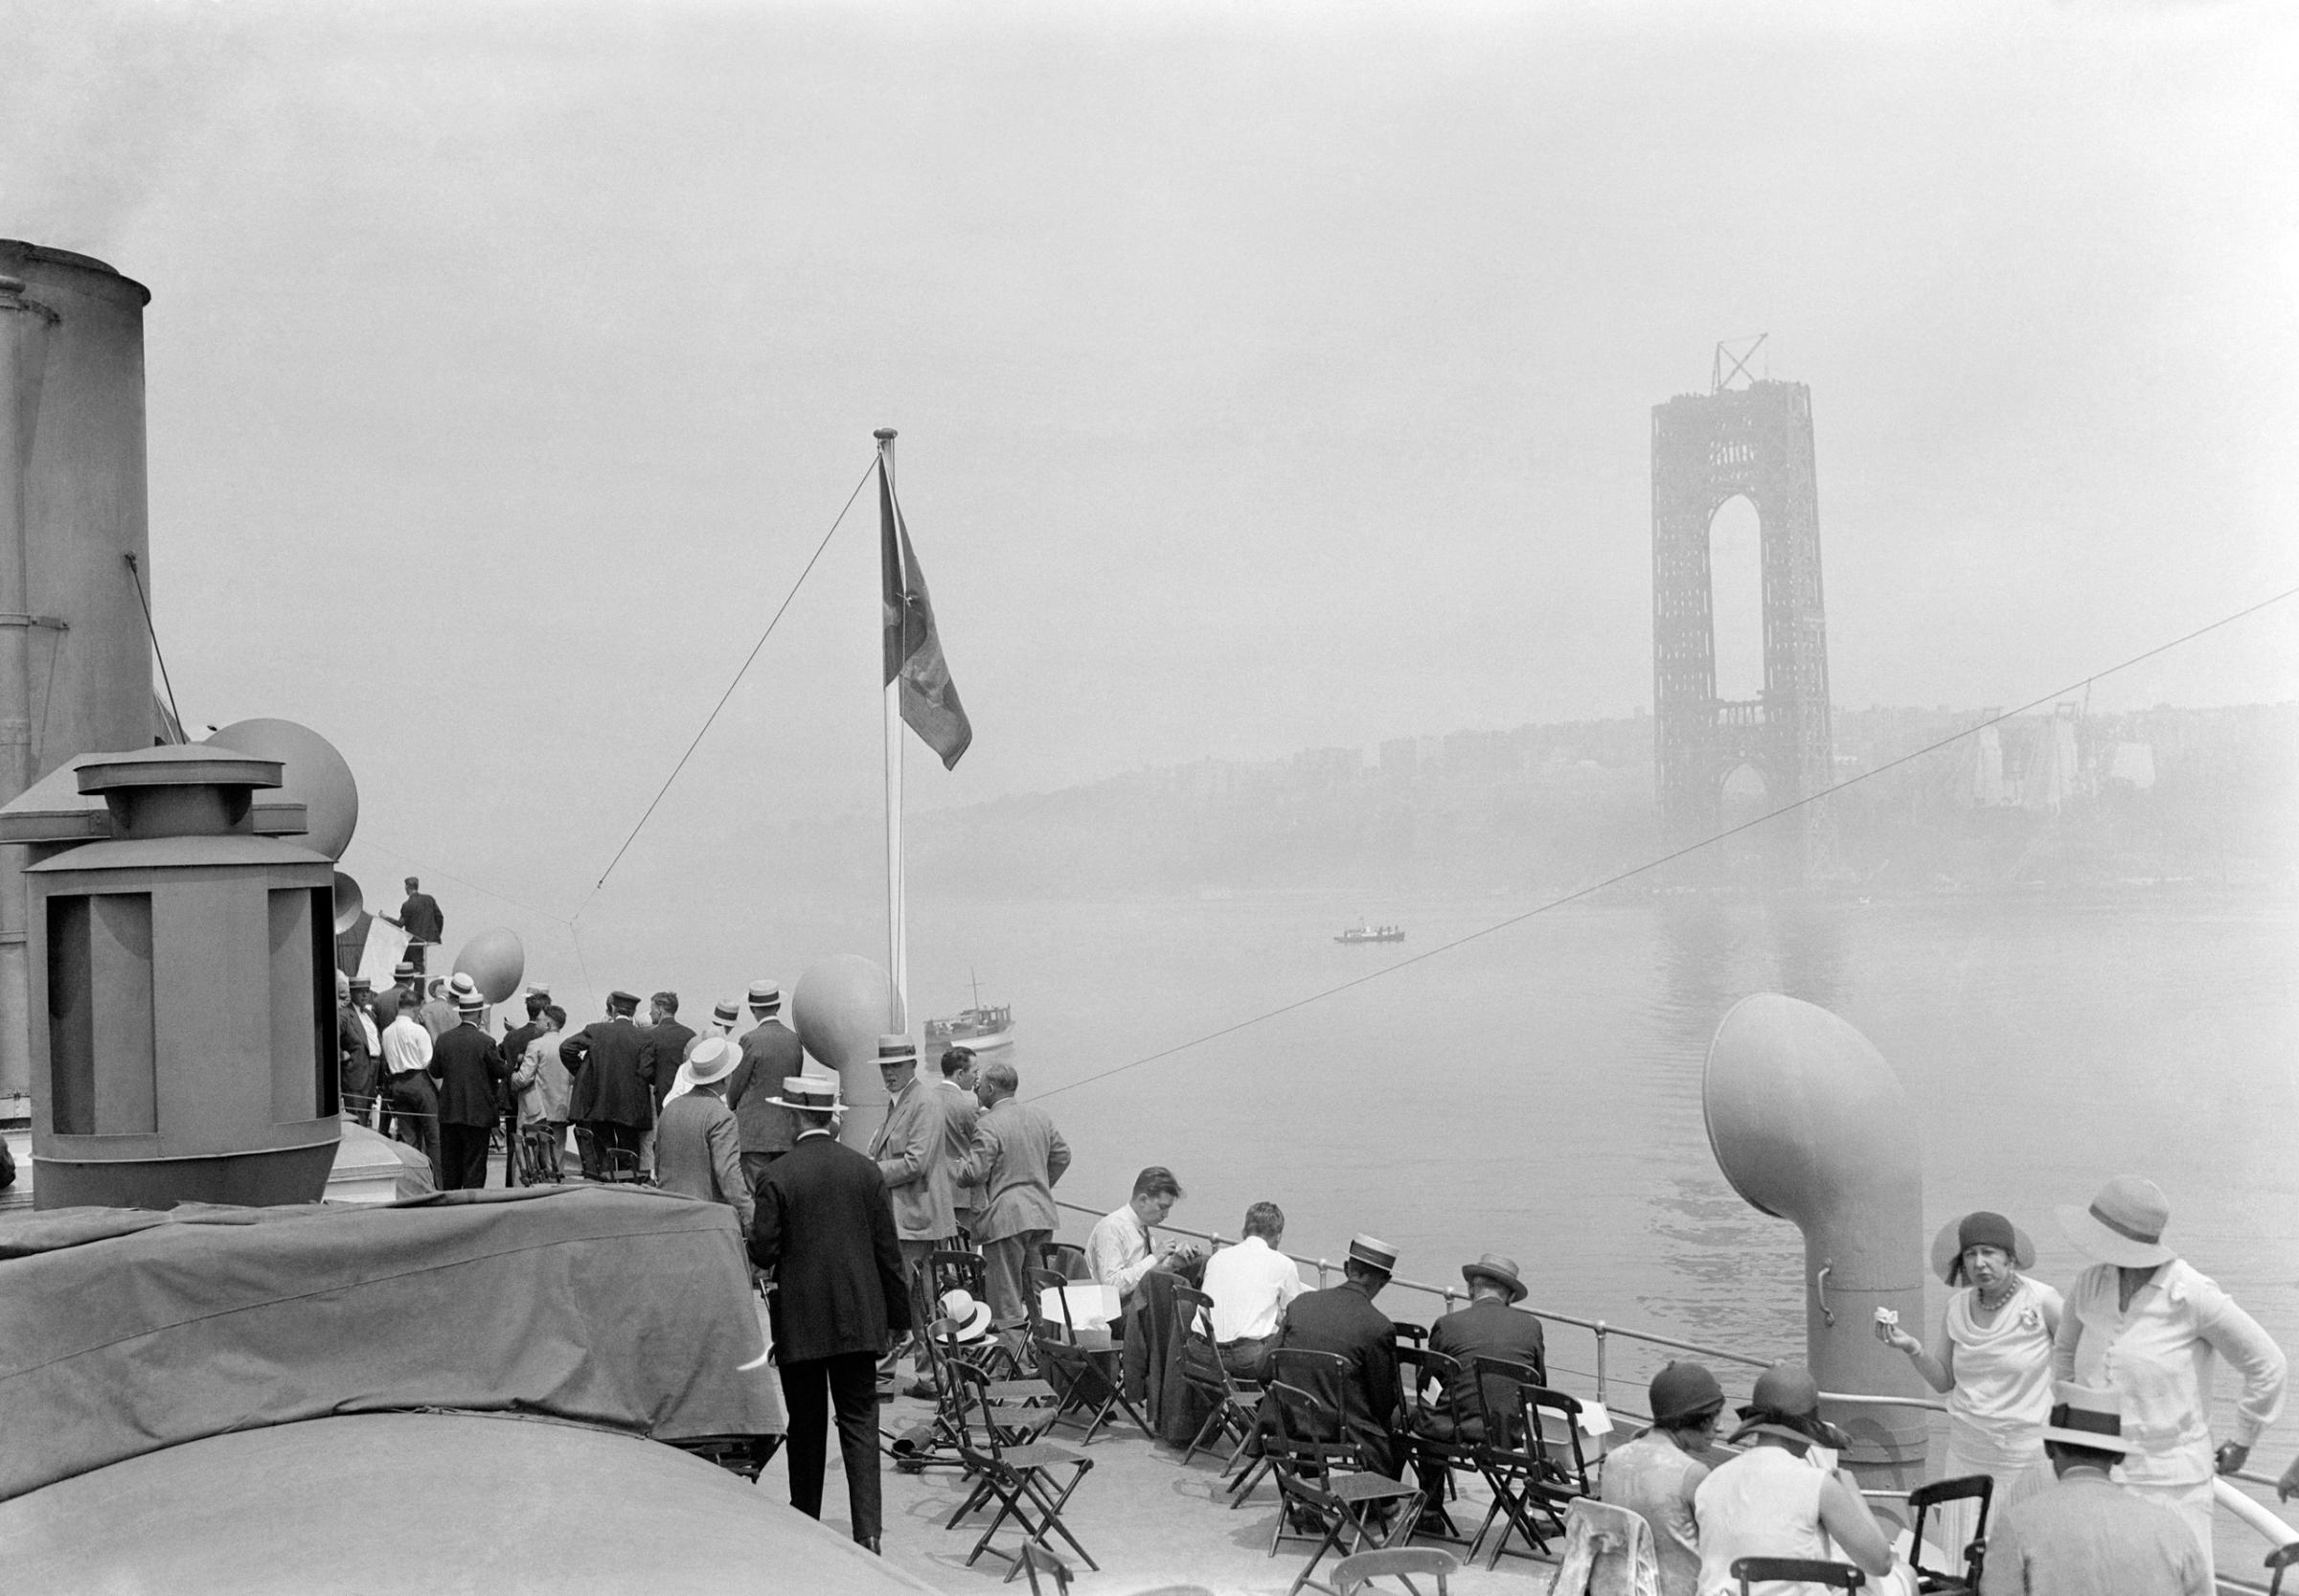 New Jersey and New York connected together by first cable of the new Hudson River Bridge at 178th Street, Manhattan Borough, New York City. Photo shows a general view of the crowd on the Hudson River Day Line steamer Peter Stuyvesant watching the raising of the cable of the new Hudson River Bridge. One of the large piers of the bridge may be seen in the background to where the cable was hoisted from the river bottom.